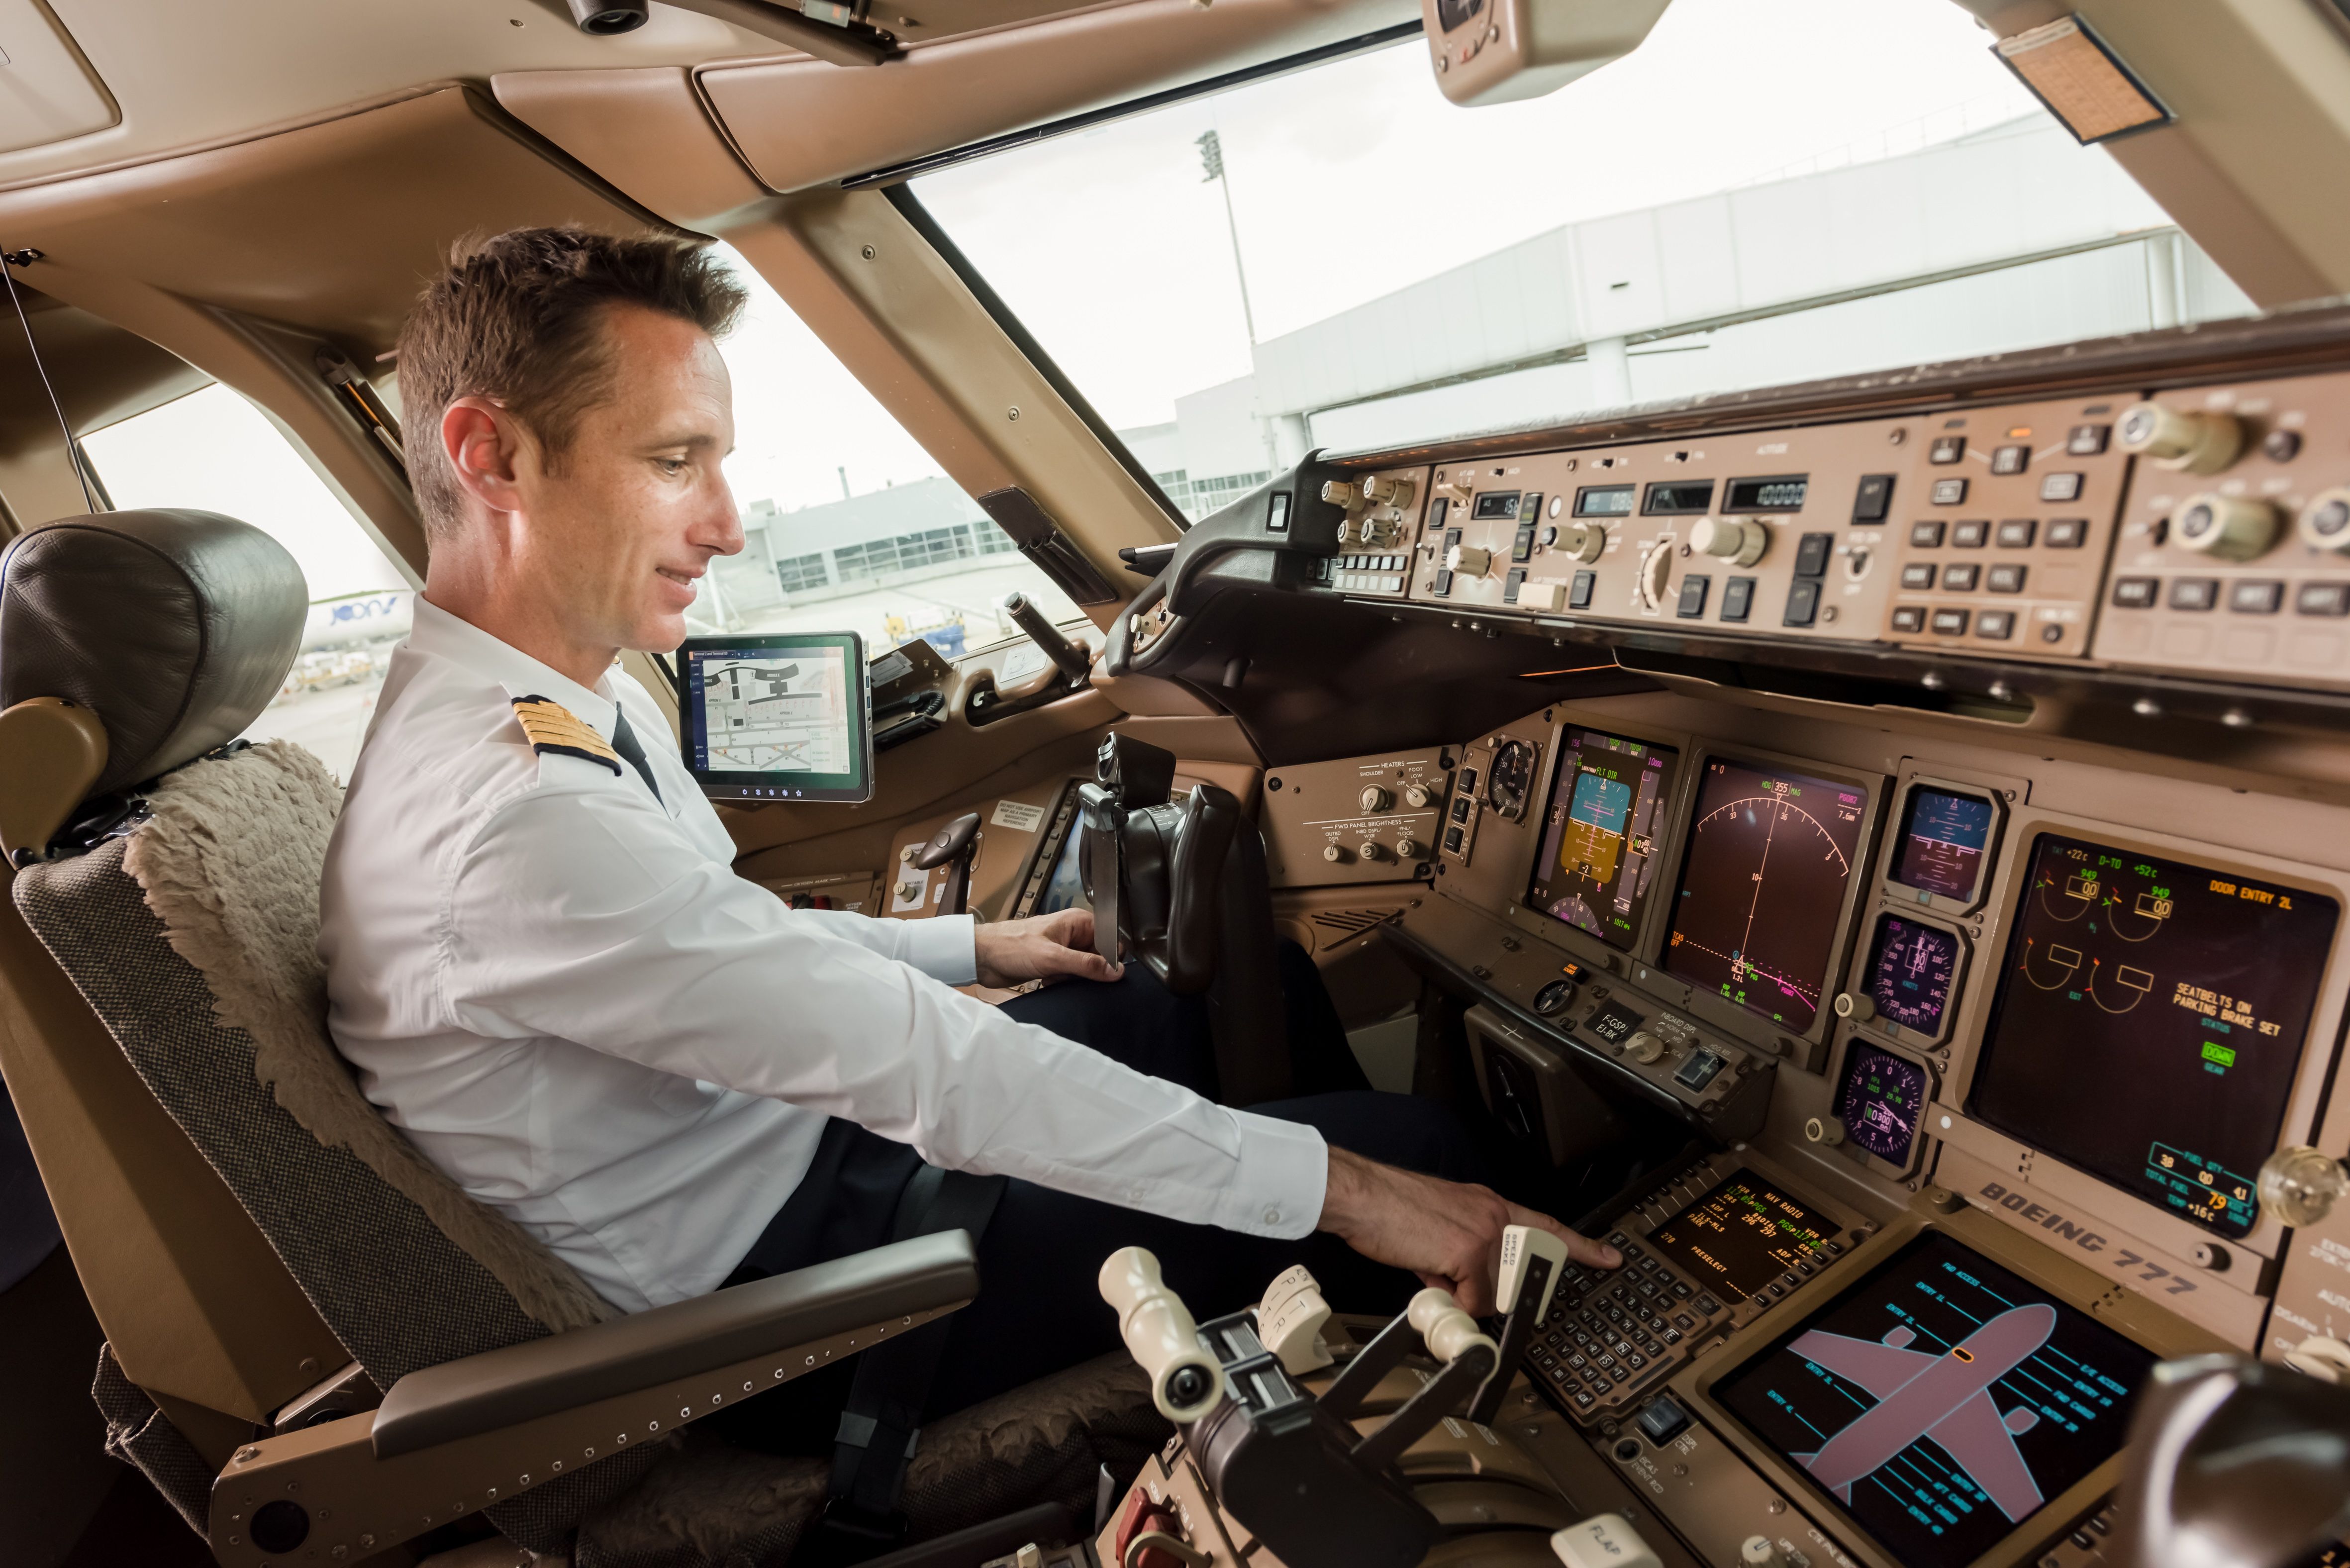 An Air France pilot interacting with the ACARS system in the cockpit.